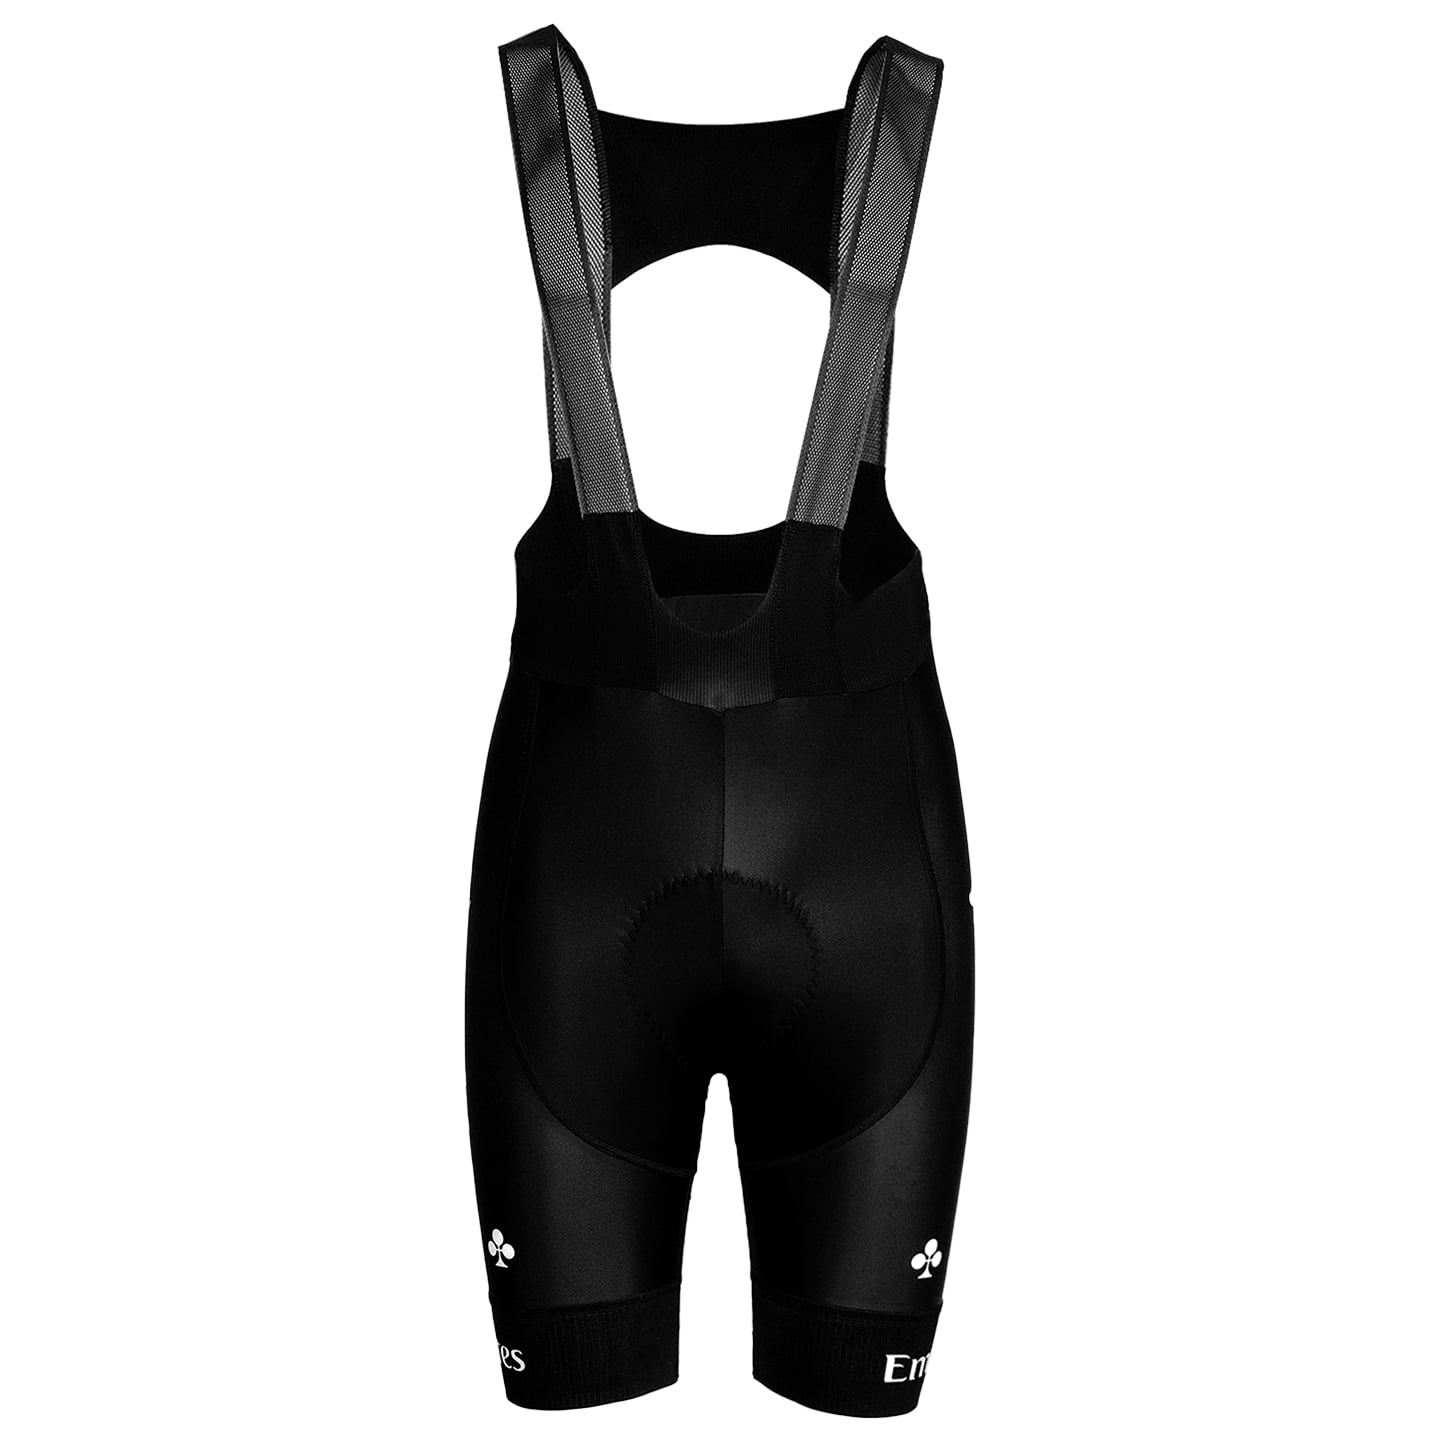 UAE TEAM EMIRATES 2023 Bib Shorts, for men, size 2XL, Cycle trousers, Cycle gear